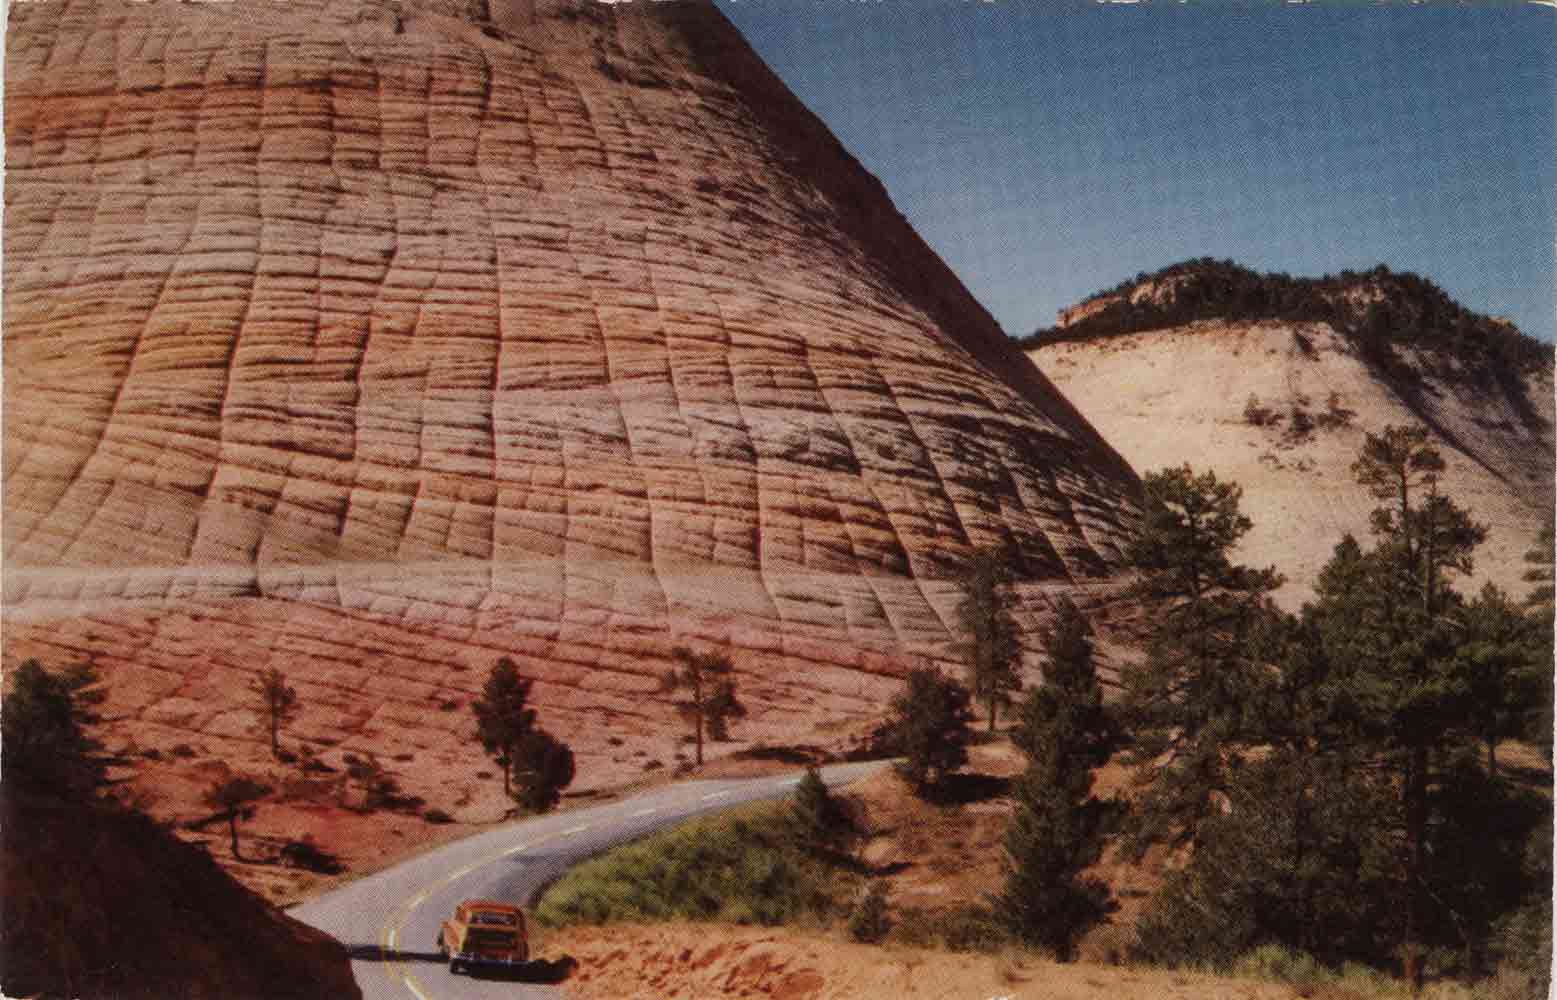 Postcard of Checkerboard Mesa, Utah, c. 1964, from Steinberg’s collection. Saul Steinberg Papers, Beinecke Rare Book and Manuscript Library, Yale University.